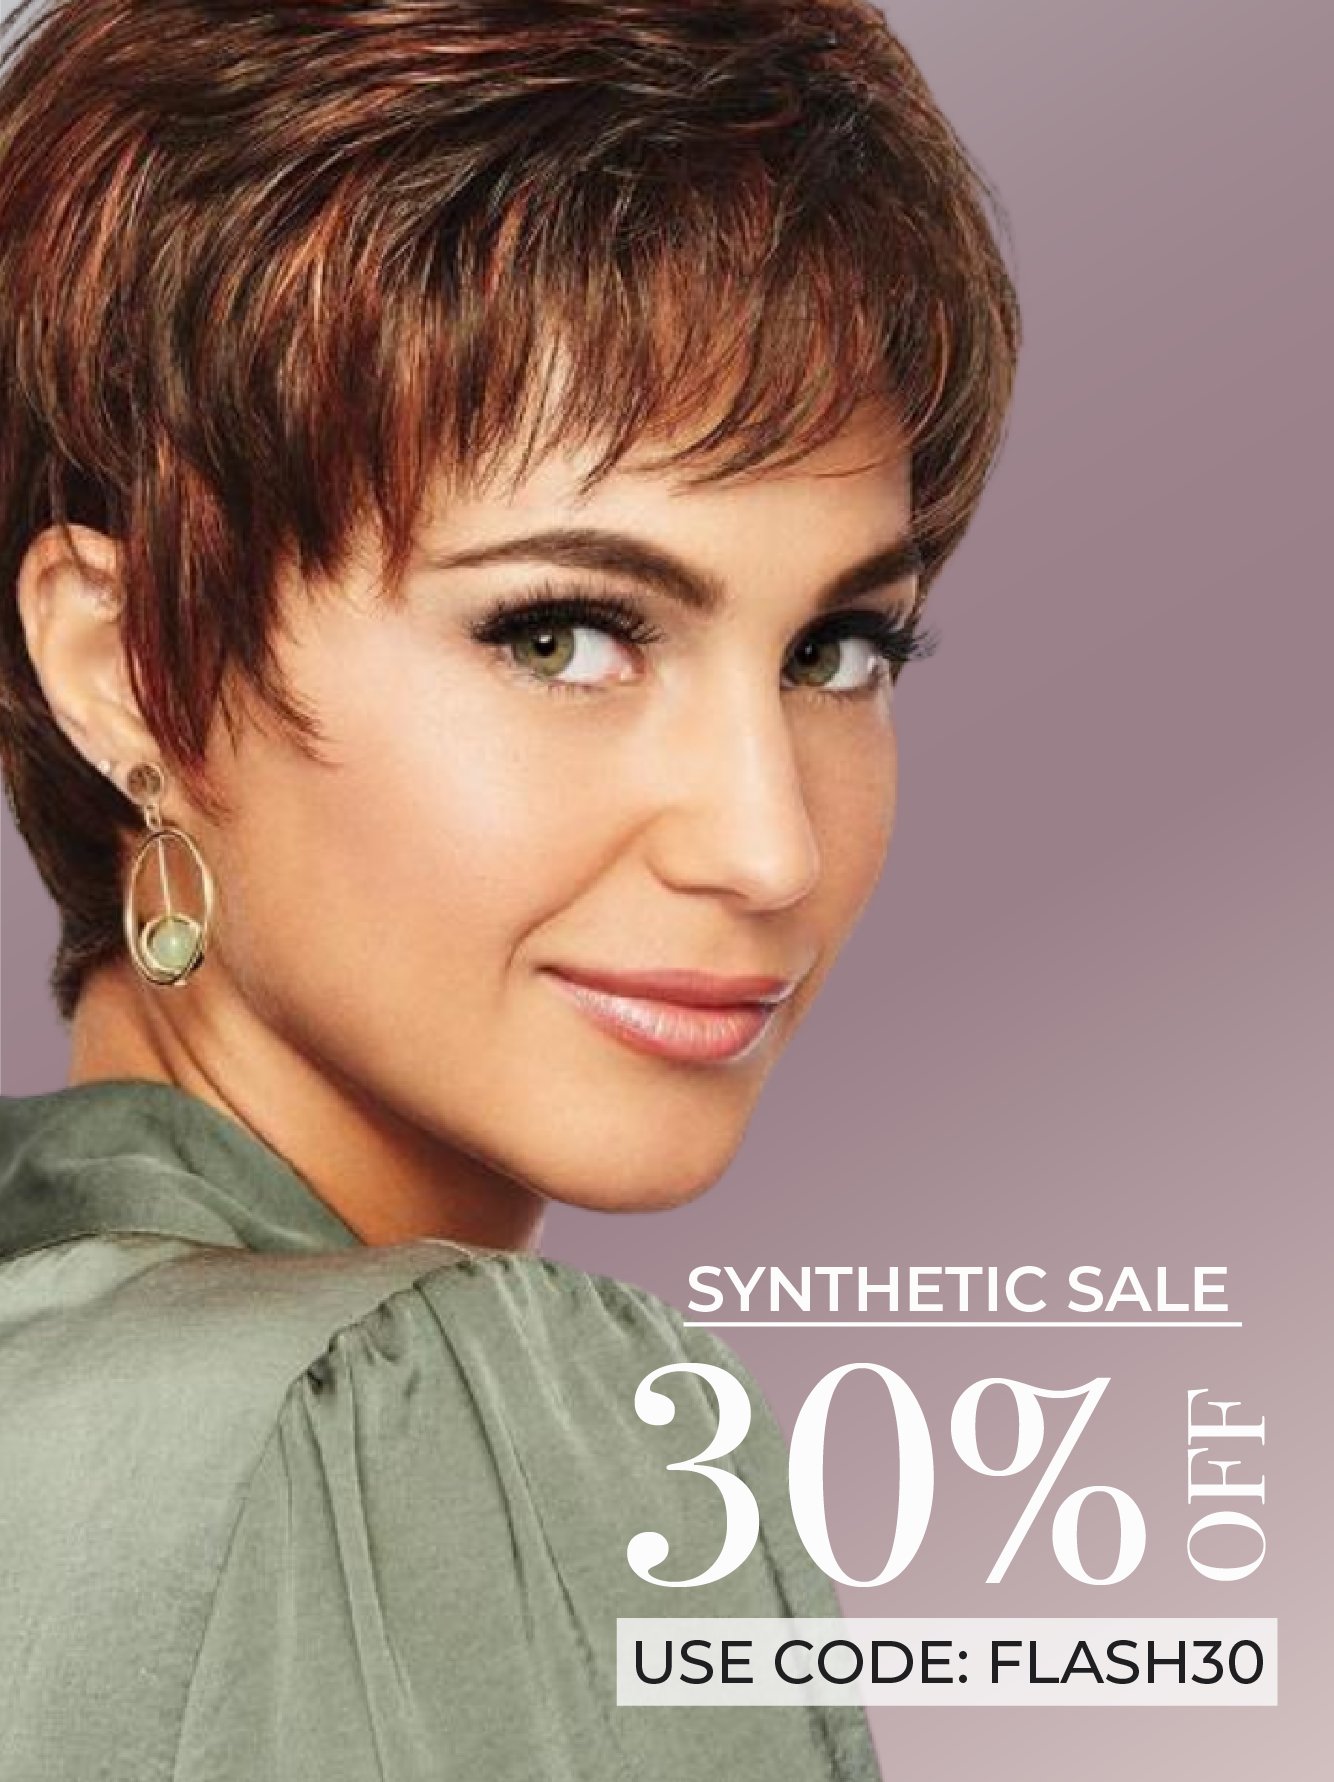 Take 30% off synthetic wigs today only